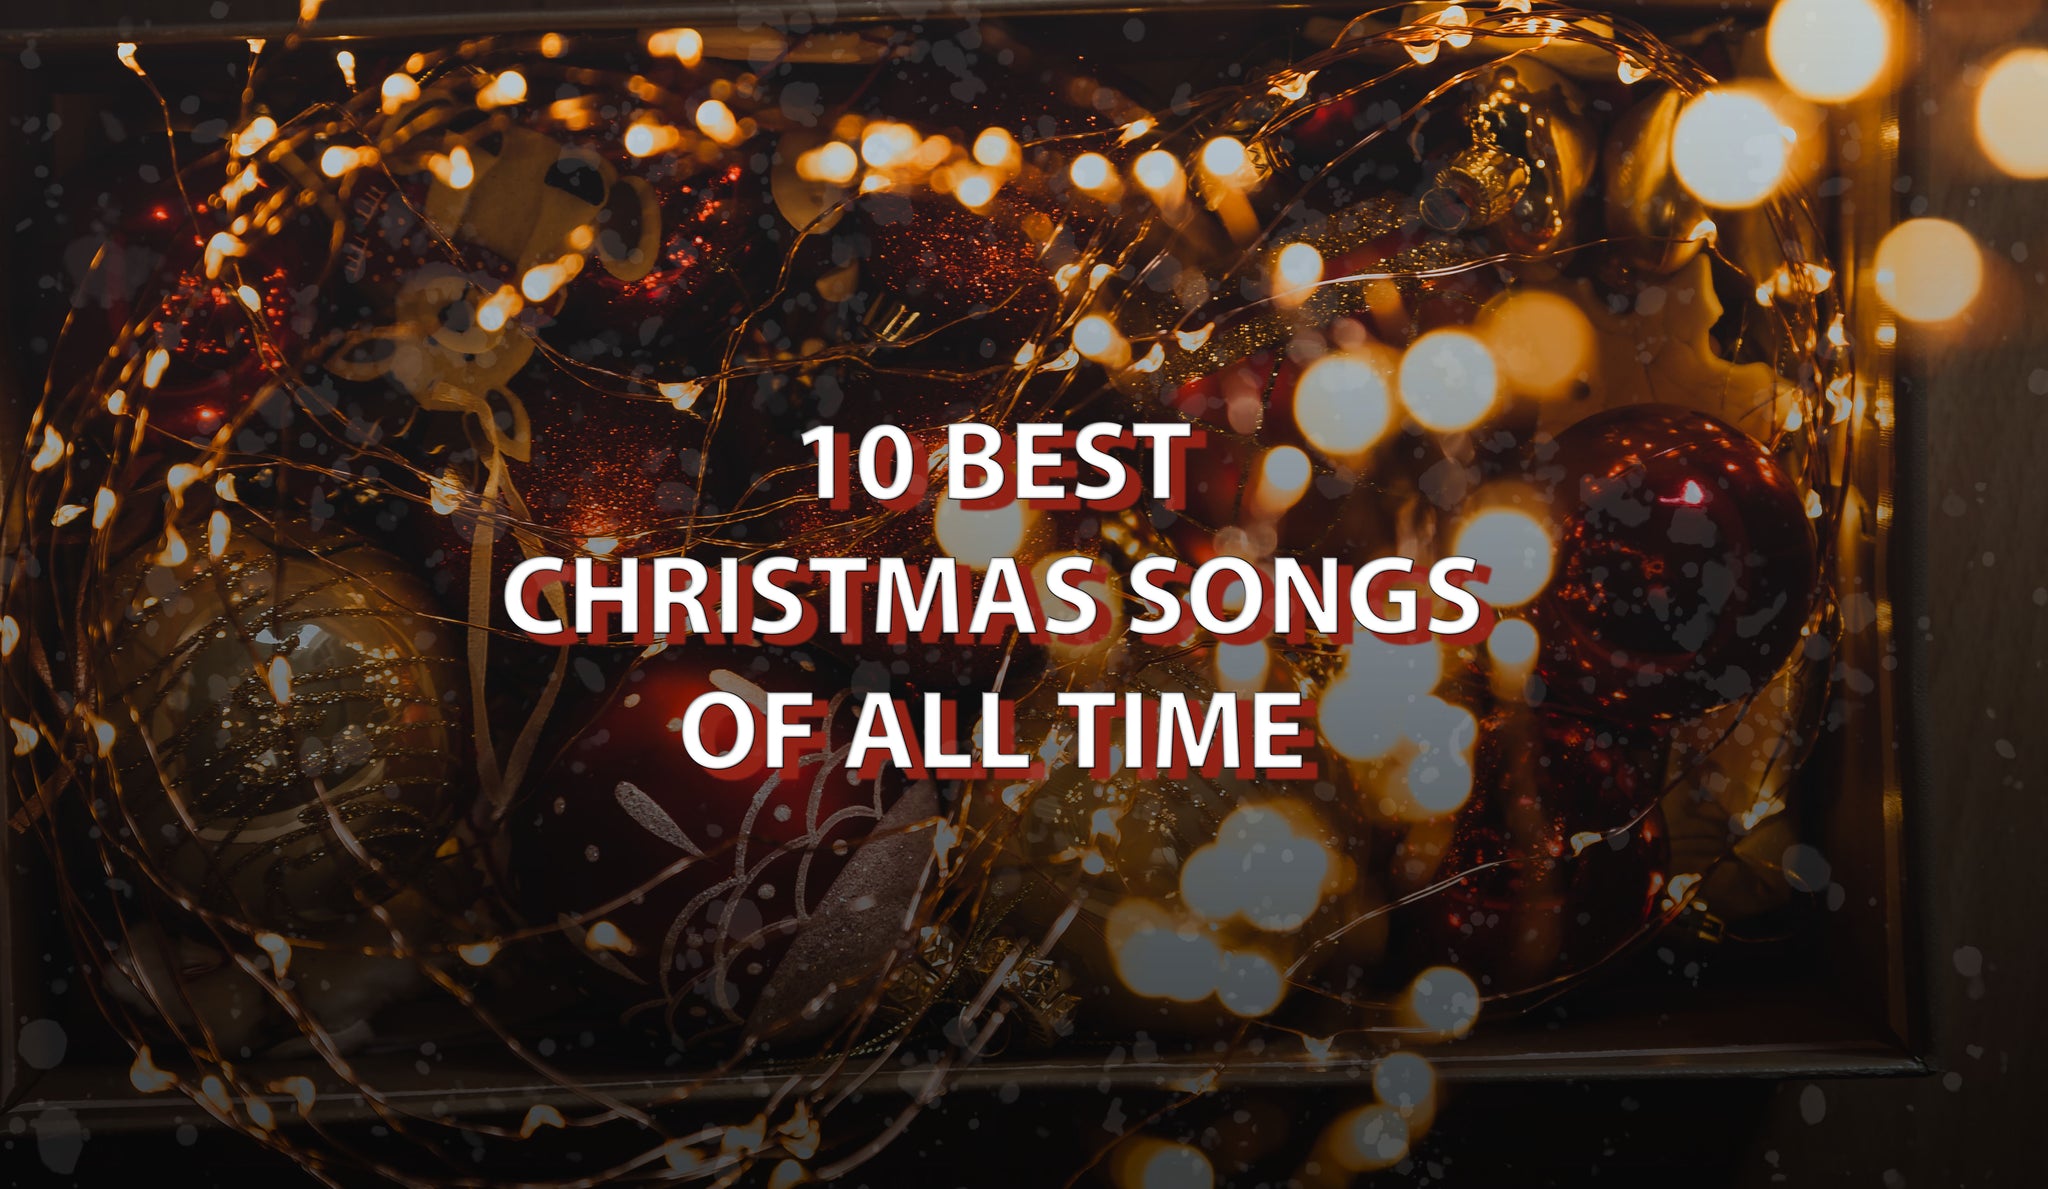 10 Best Christmas Songs of All Time